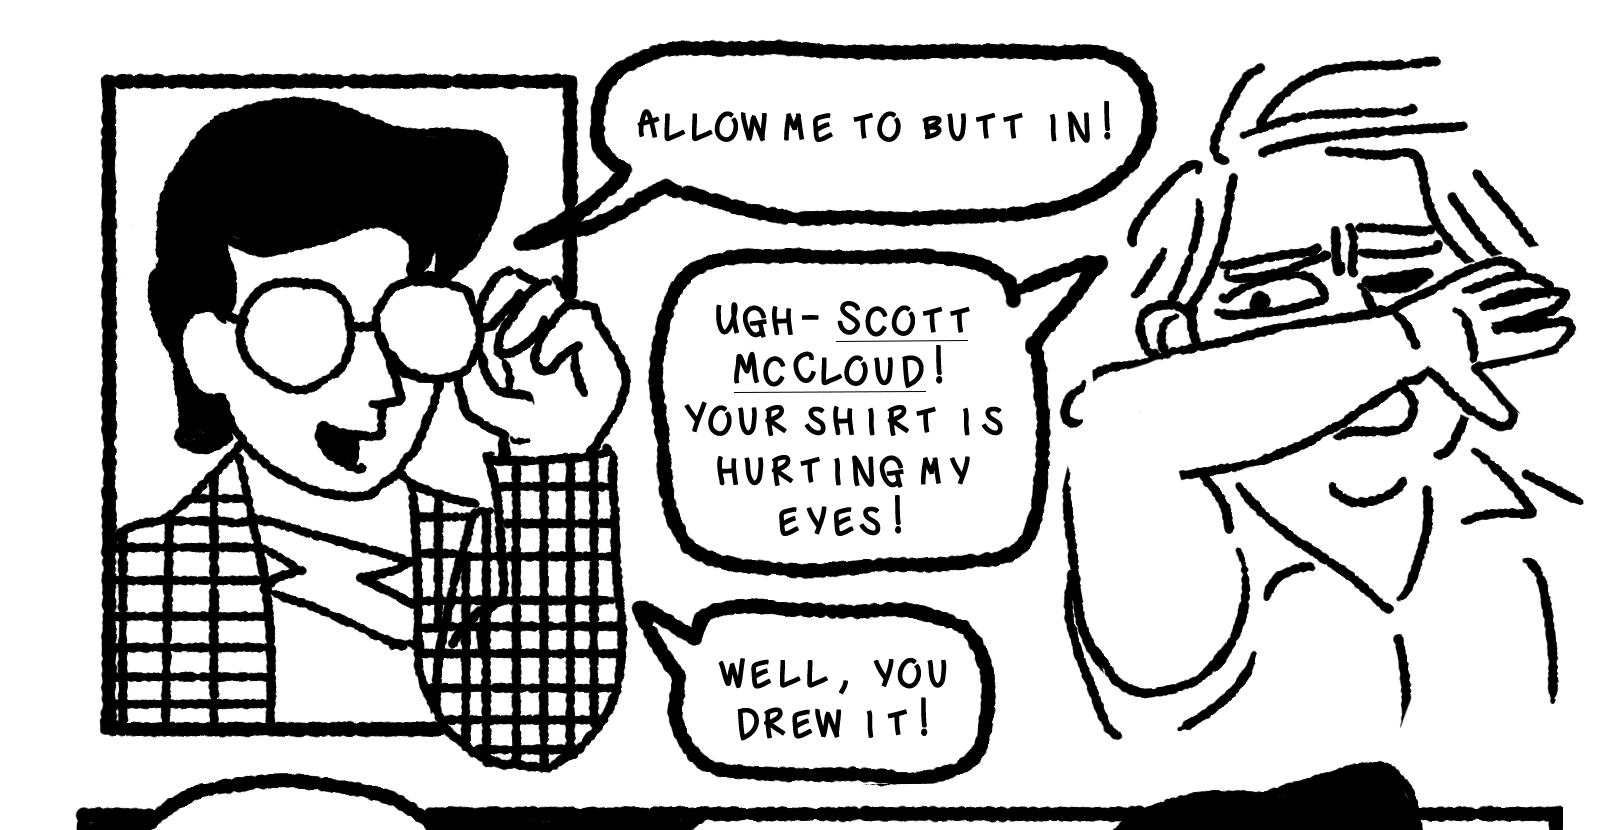 Scott McCloud pops up in a tiny panel of his own, a man wearing a loud plaid shirt with a swooped black hairdo and impenetrable glasses, which he is fixing with his arm hanging half out of the panel. He says, Allow me to butt in! Elk shields his face, pained, and says: Ugh- Scott McCloud! Your shirt is hurting my eyes! He replies, Well, you drew it!